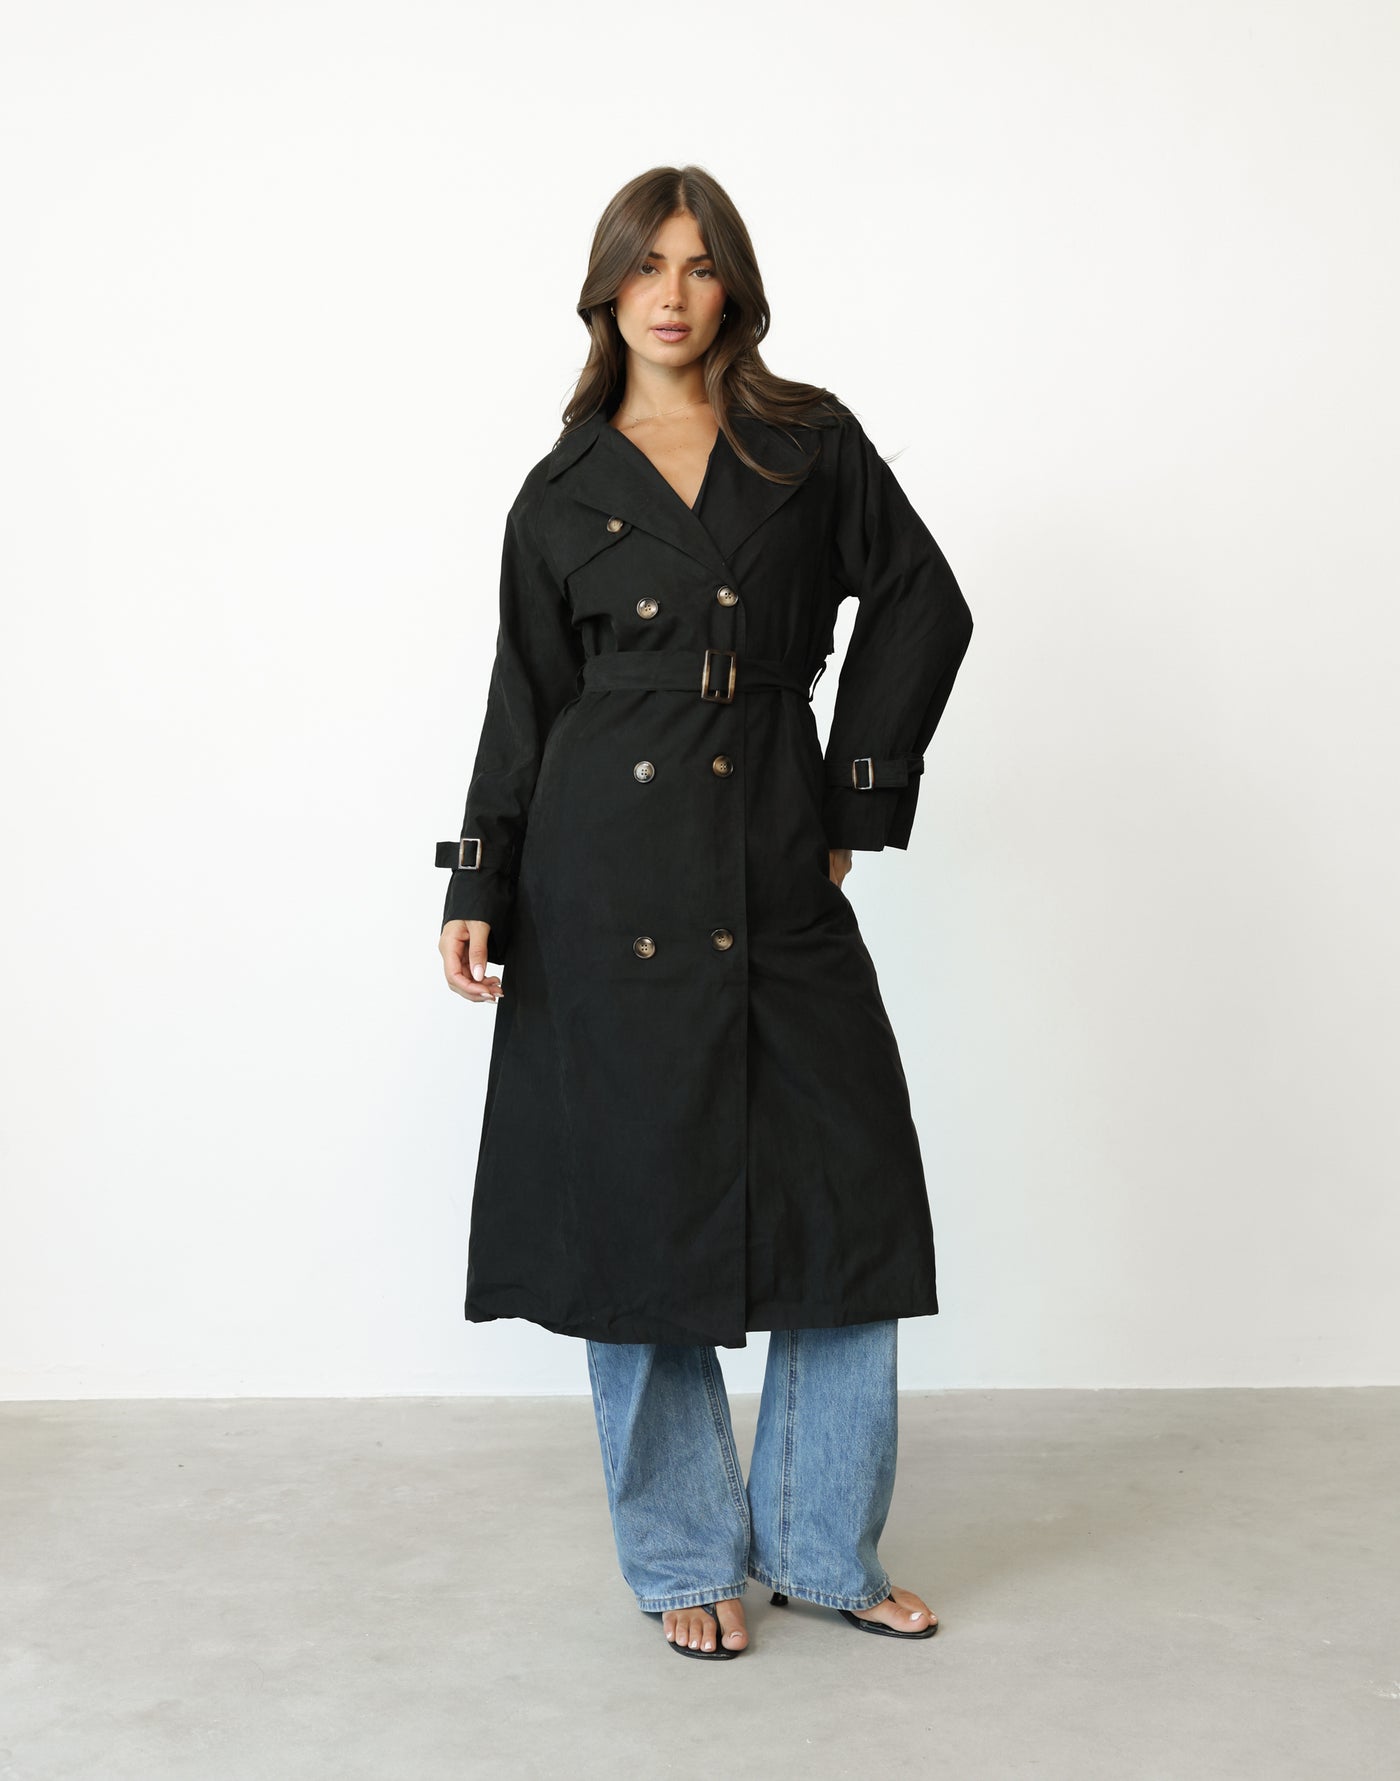 Izaiah Trench Coat (Black) - Full Length Trench Coat with Waist Tie - Women's Outerwear - Charcoal Clothing